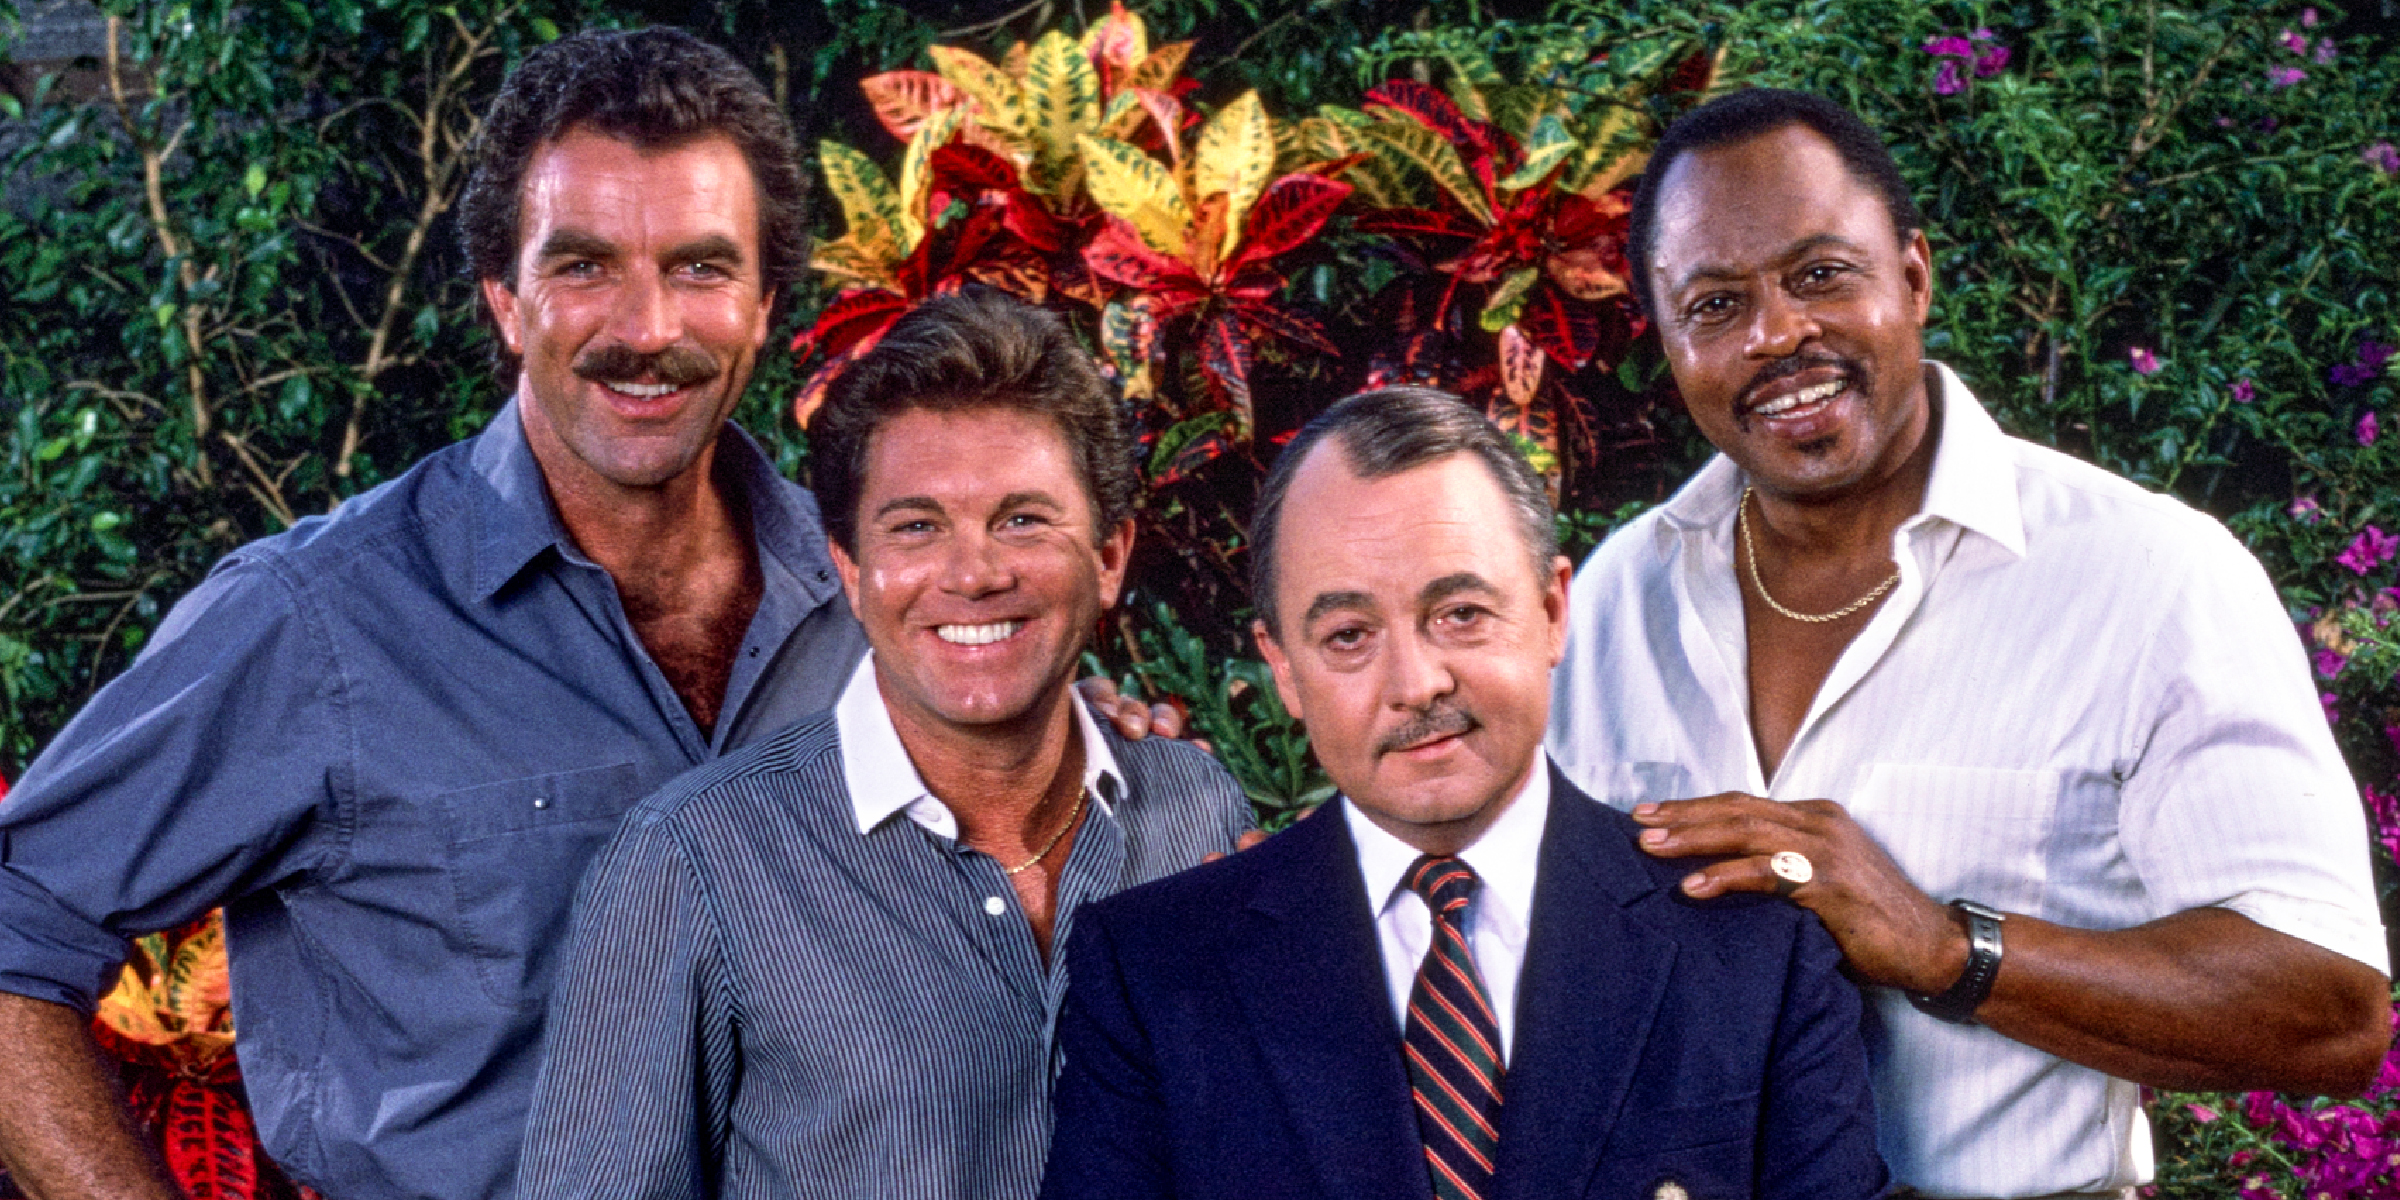 Tom Selleck, Larry Manetti, John Hillerman, y Roger E. Mosley. | Foto: Getty Images